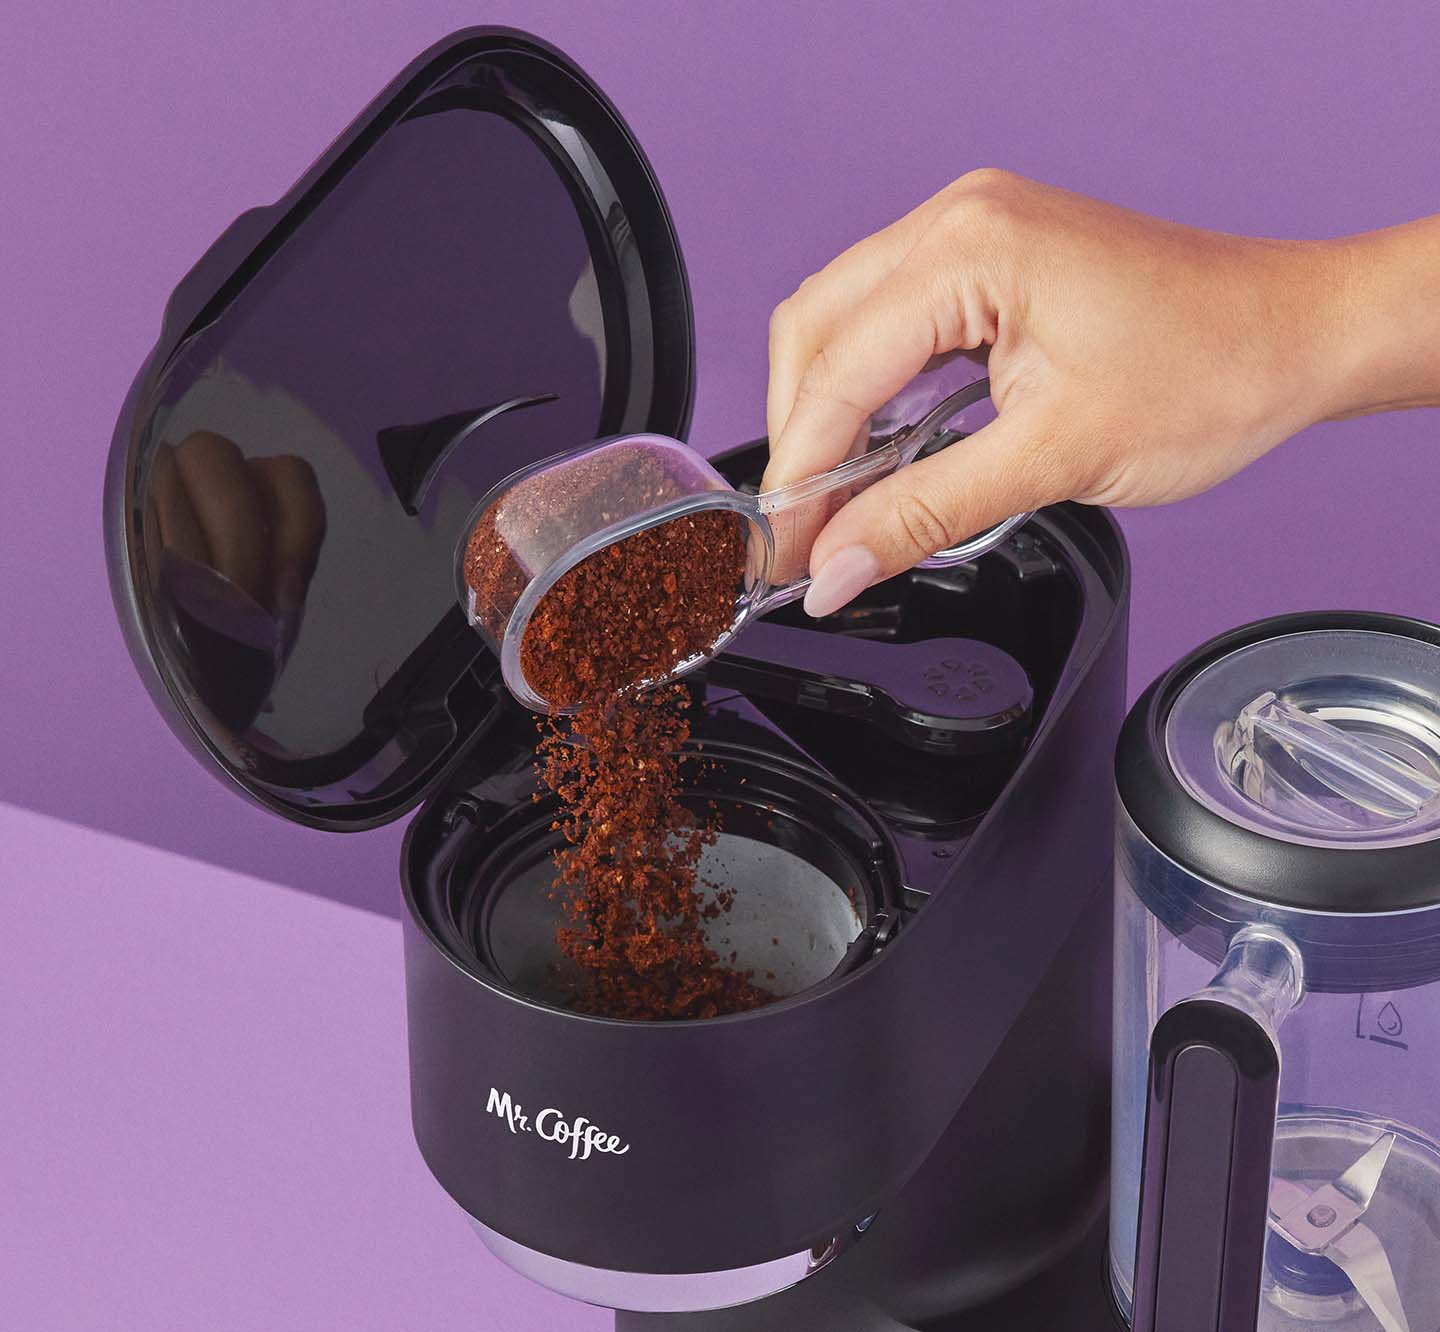 Putting coffee grounds into a coffeemaker